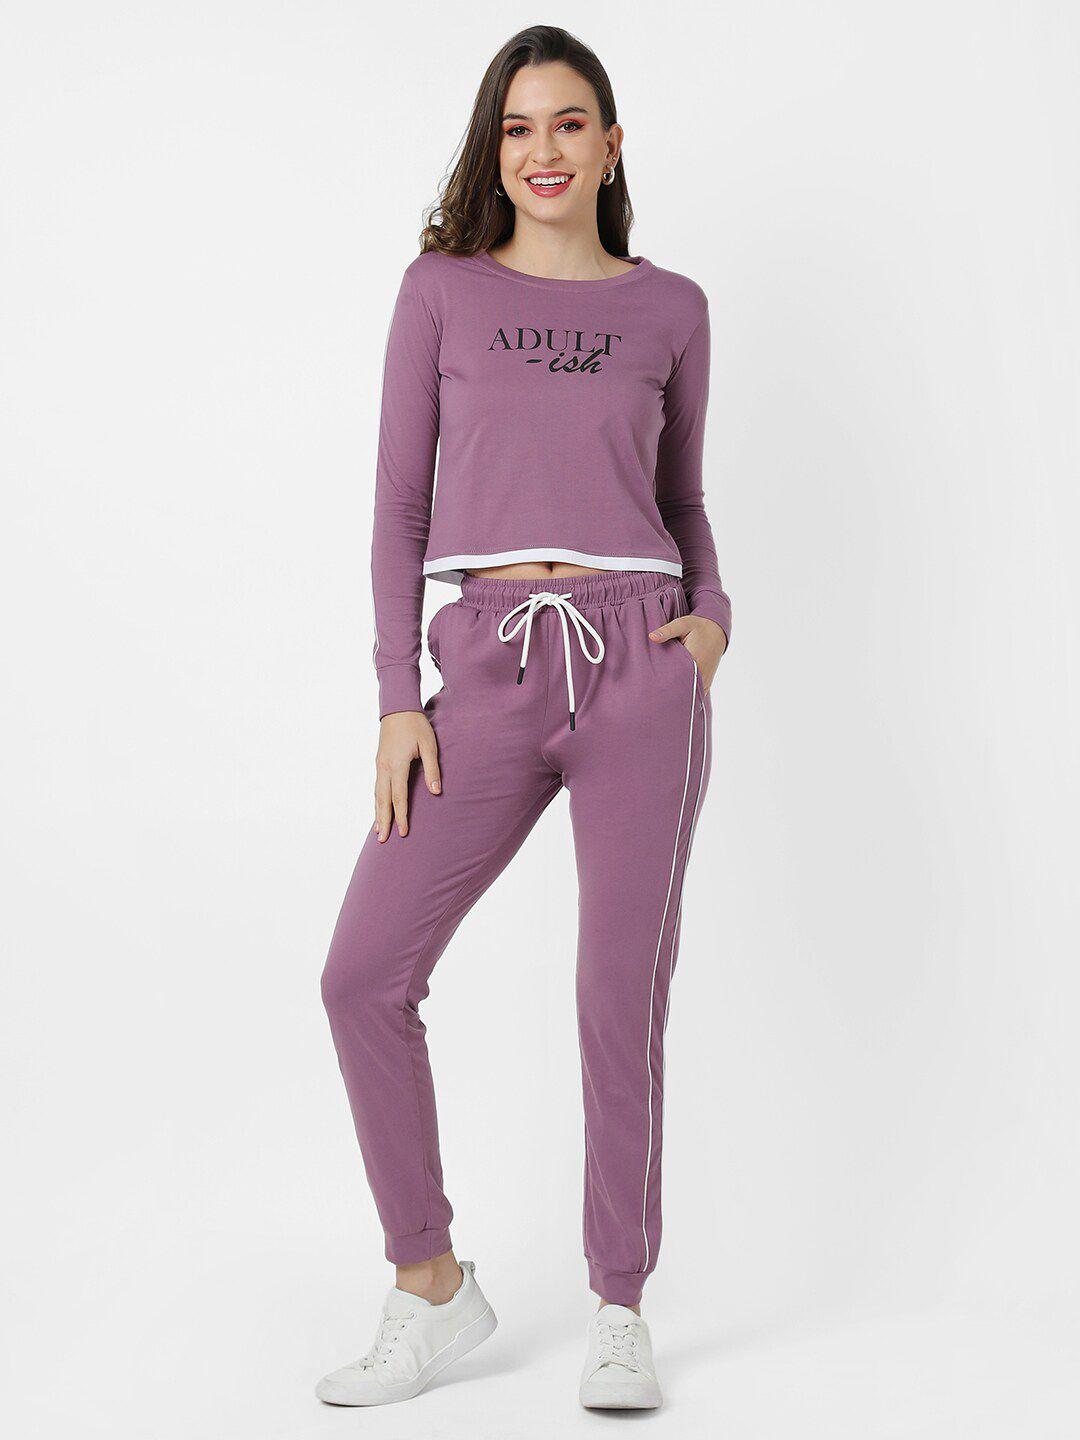 campus sutra women purple printed cotton co-ords